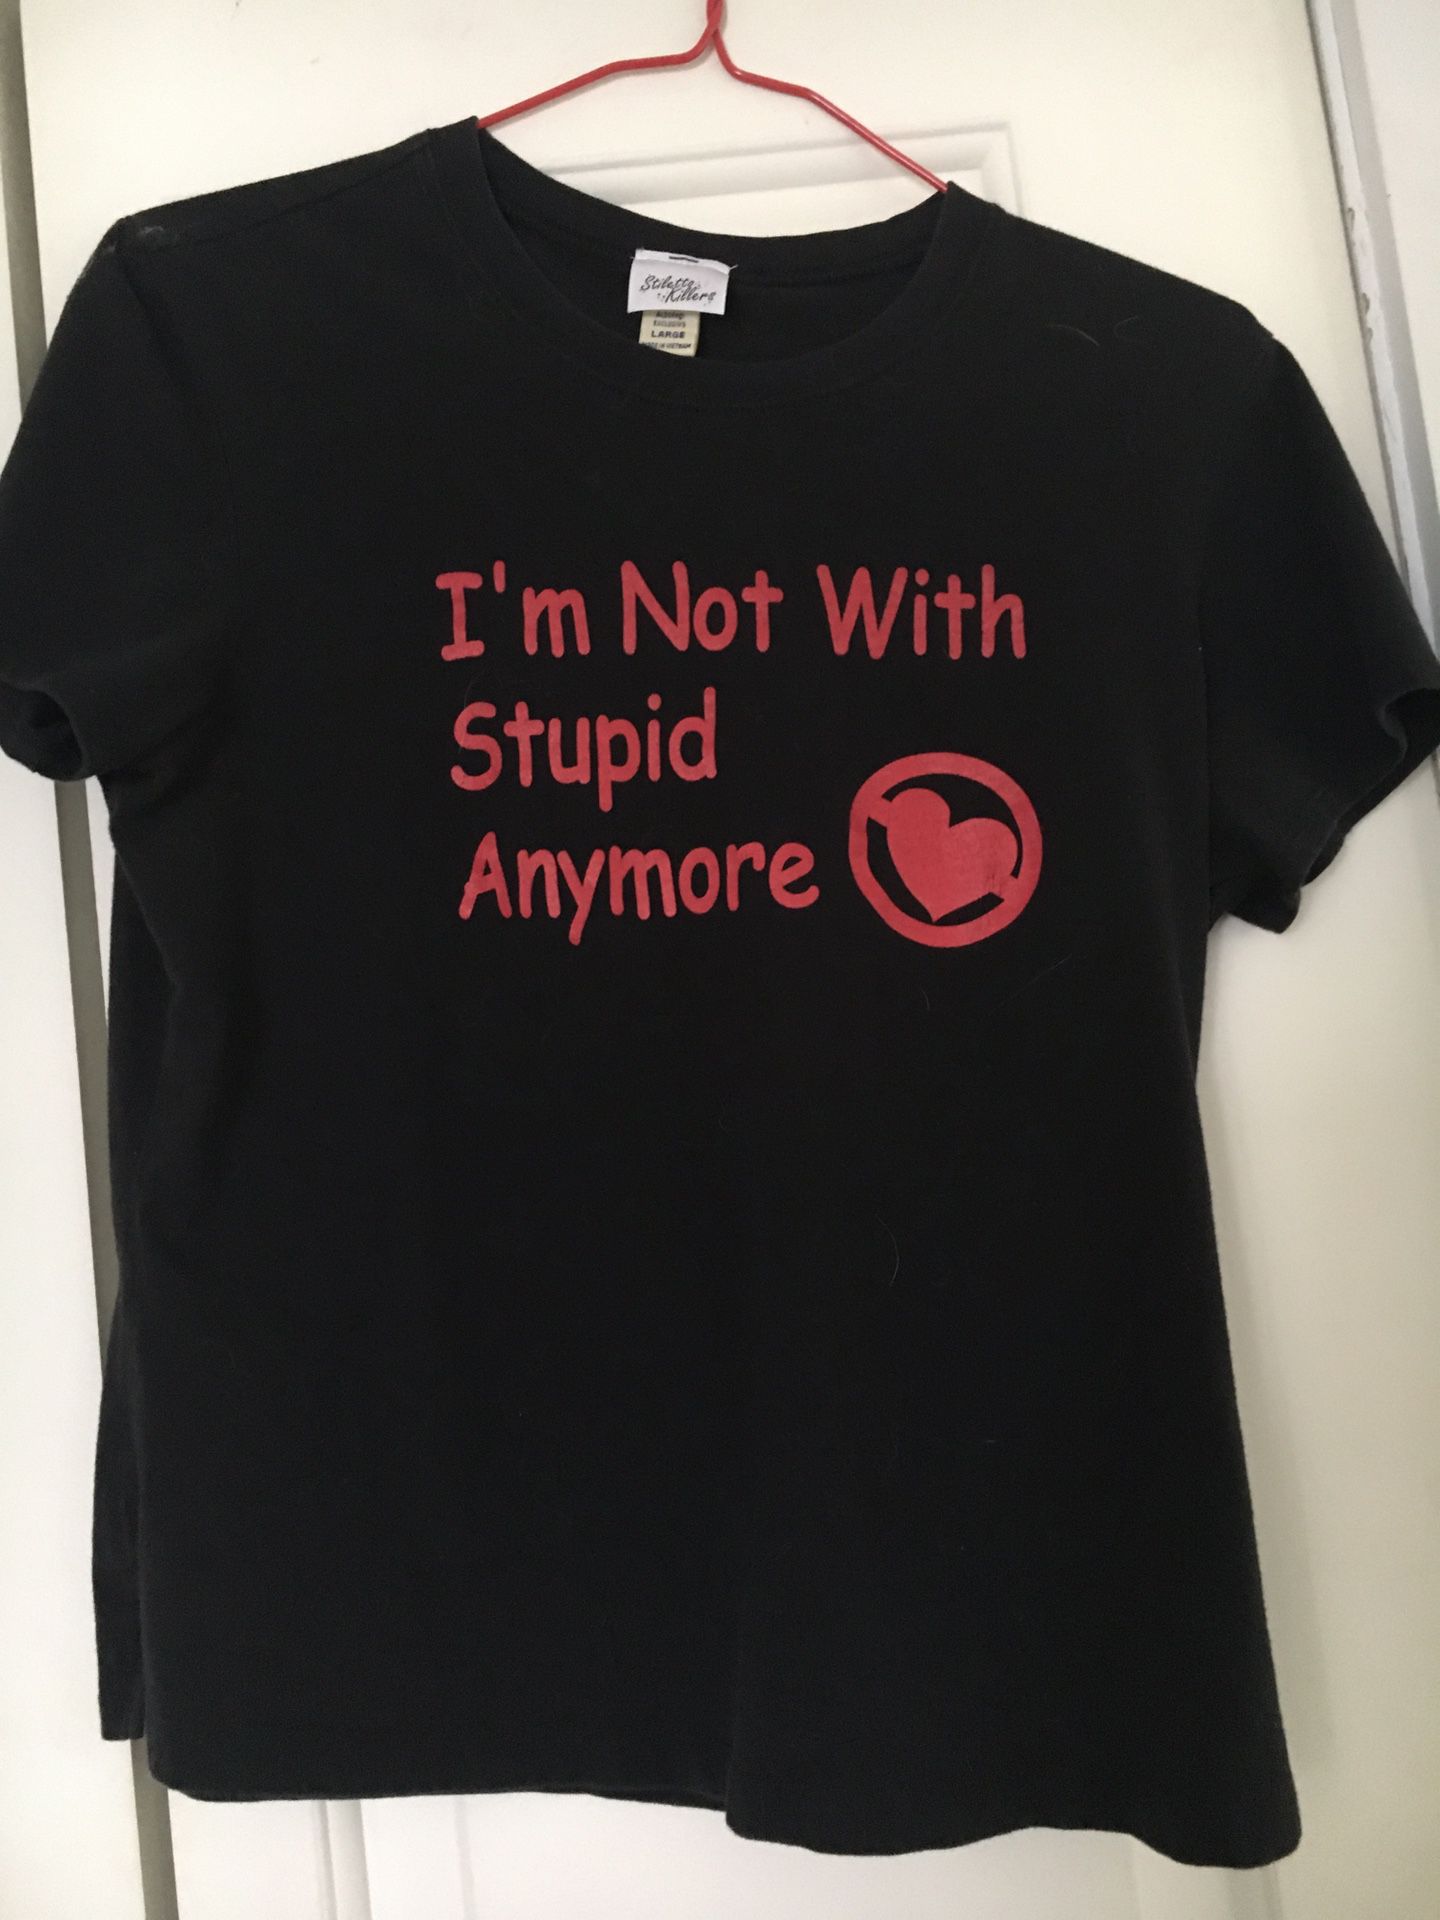 Stiletto Killers Brand Women’s T-shirt I’m Not With Stupid Anymore 